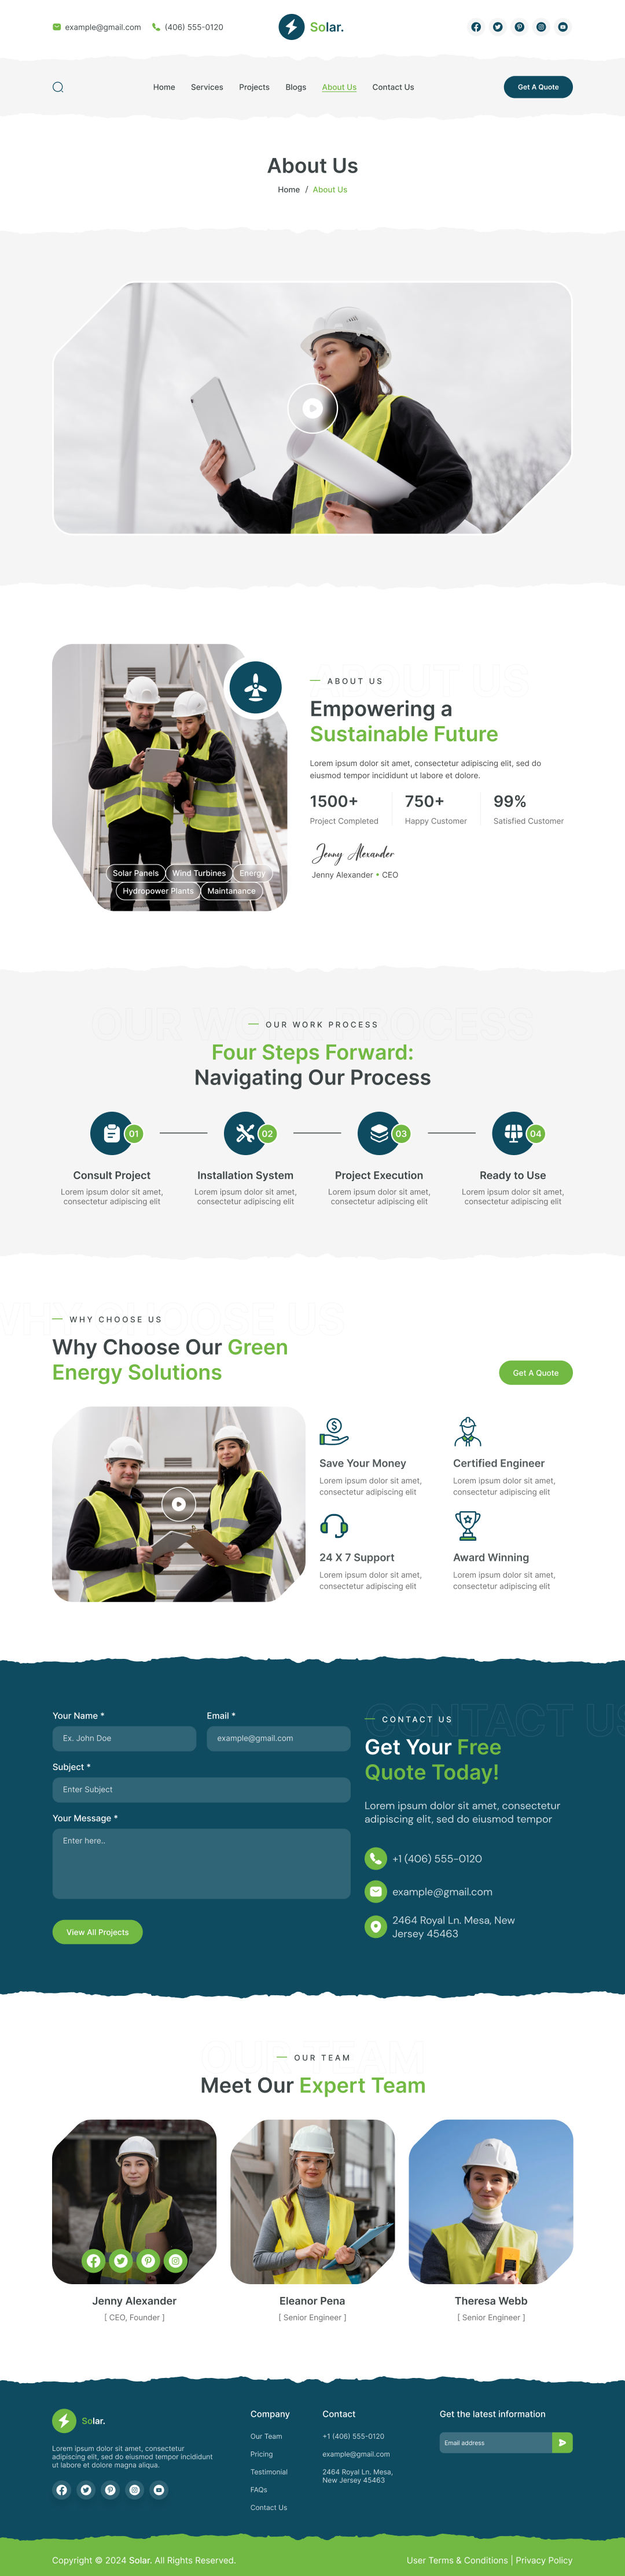 solar energy website about us page ui ux design figma